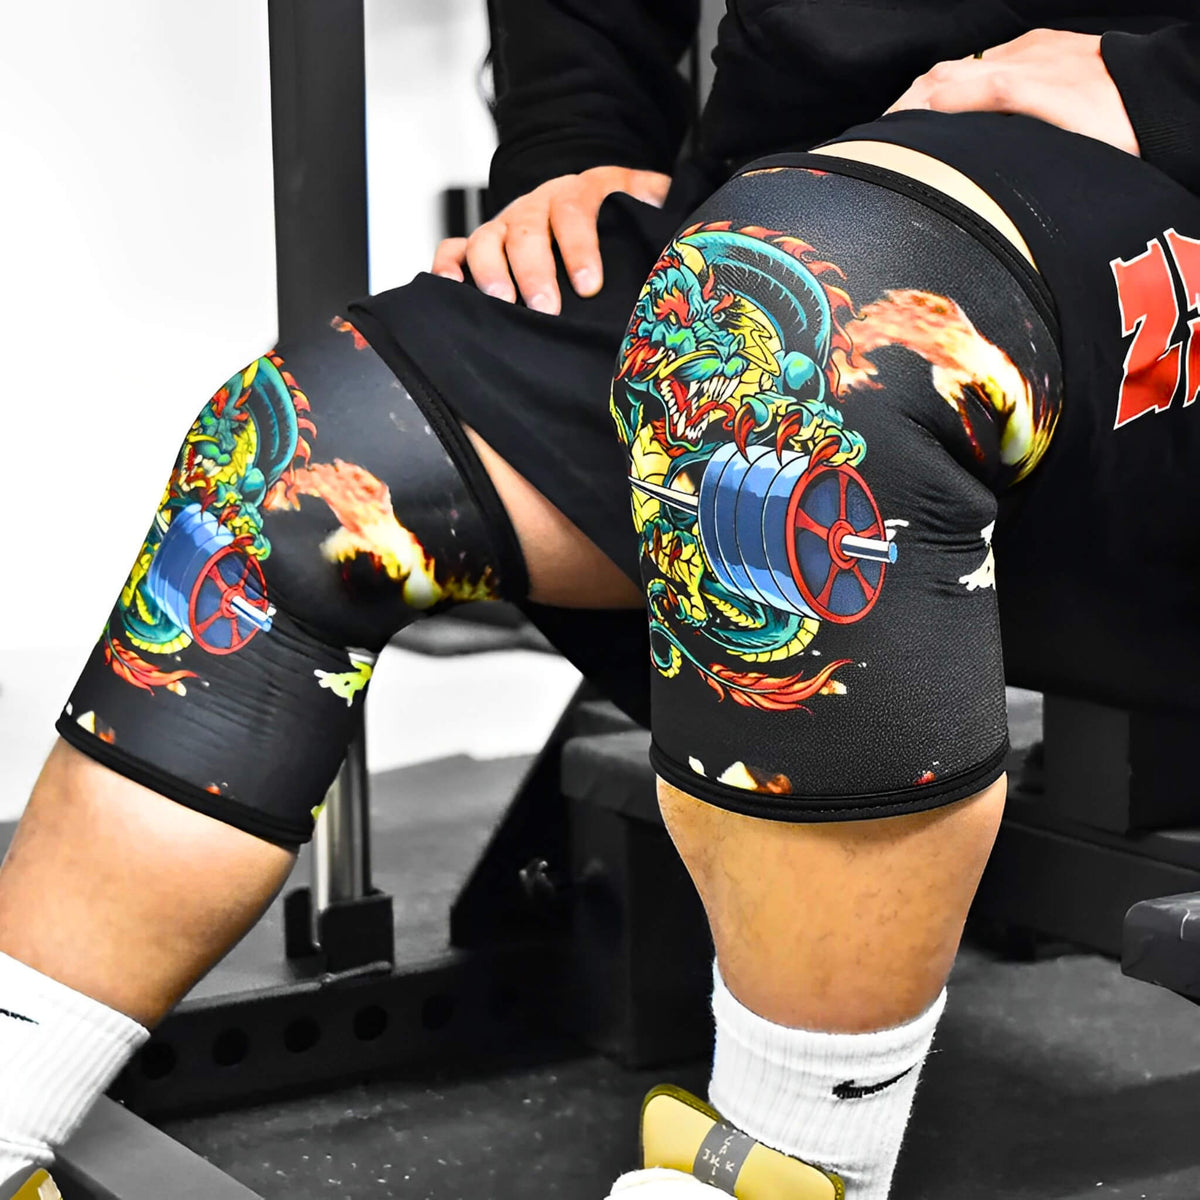 7mm "KNEE SLEEVES" [SPECIAL-EDITION] - DRAGON SERIES - Akinci Strength